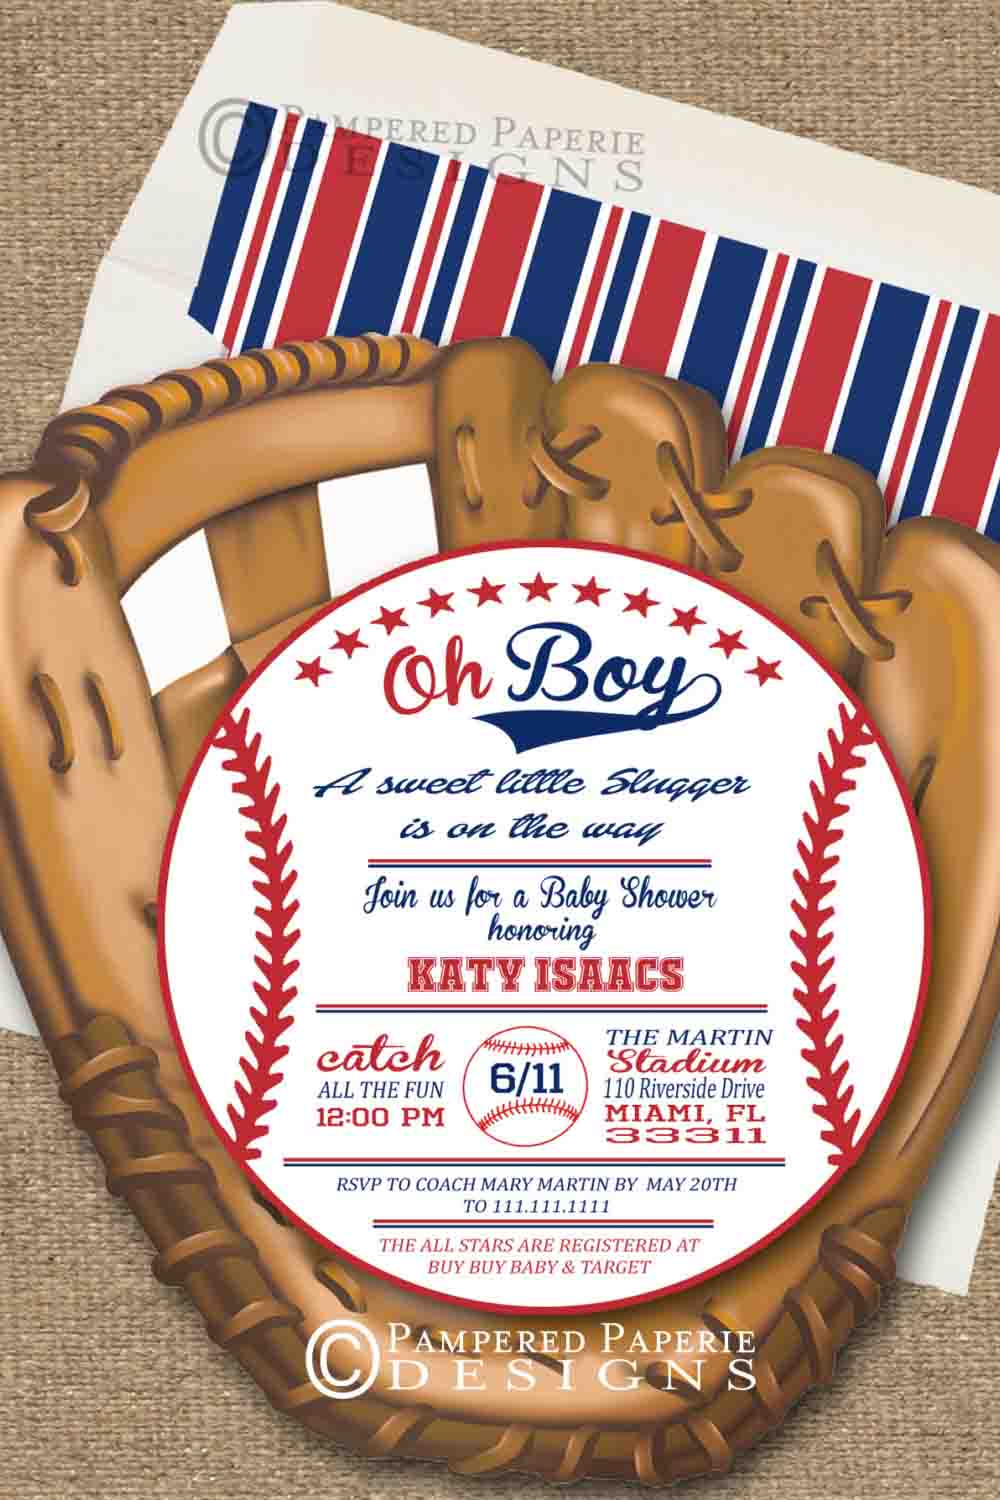 baseball-party-invitations-with-different-invitation-wording-to-inspire